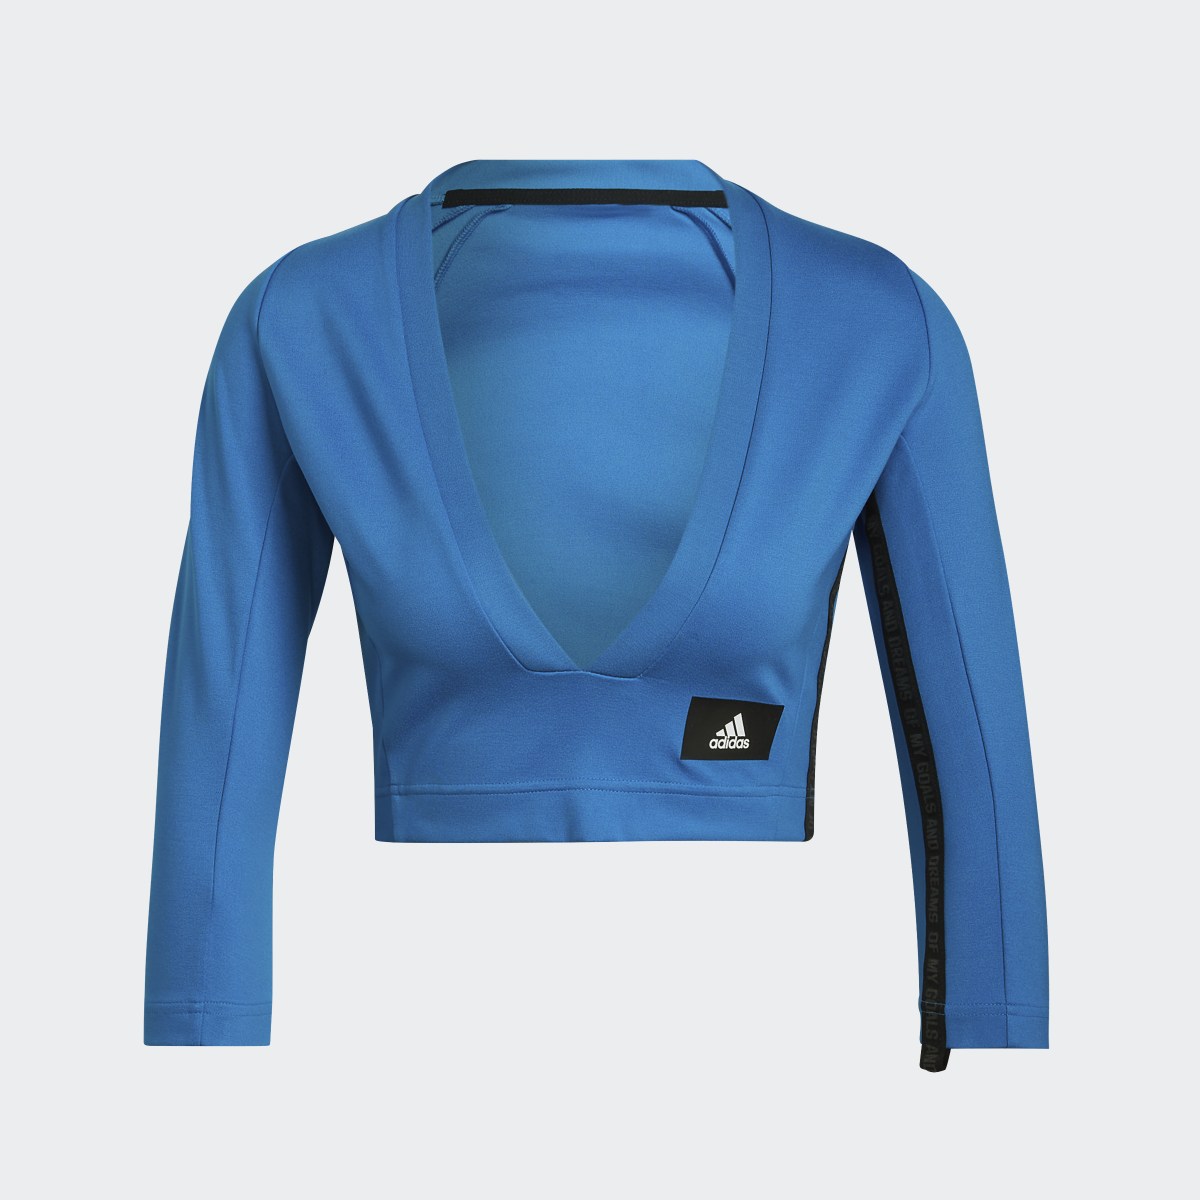 Adidas Sportswear Mission Victory Long-Sleeve Top. 8